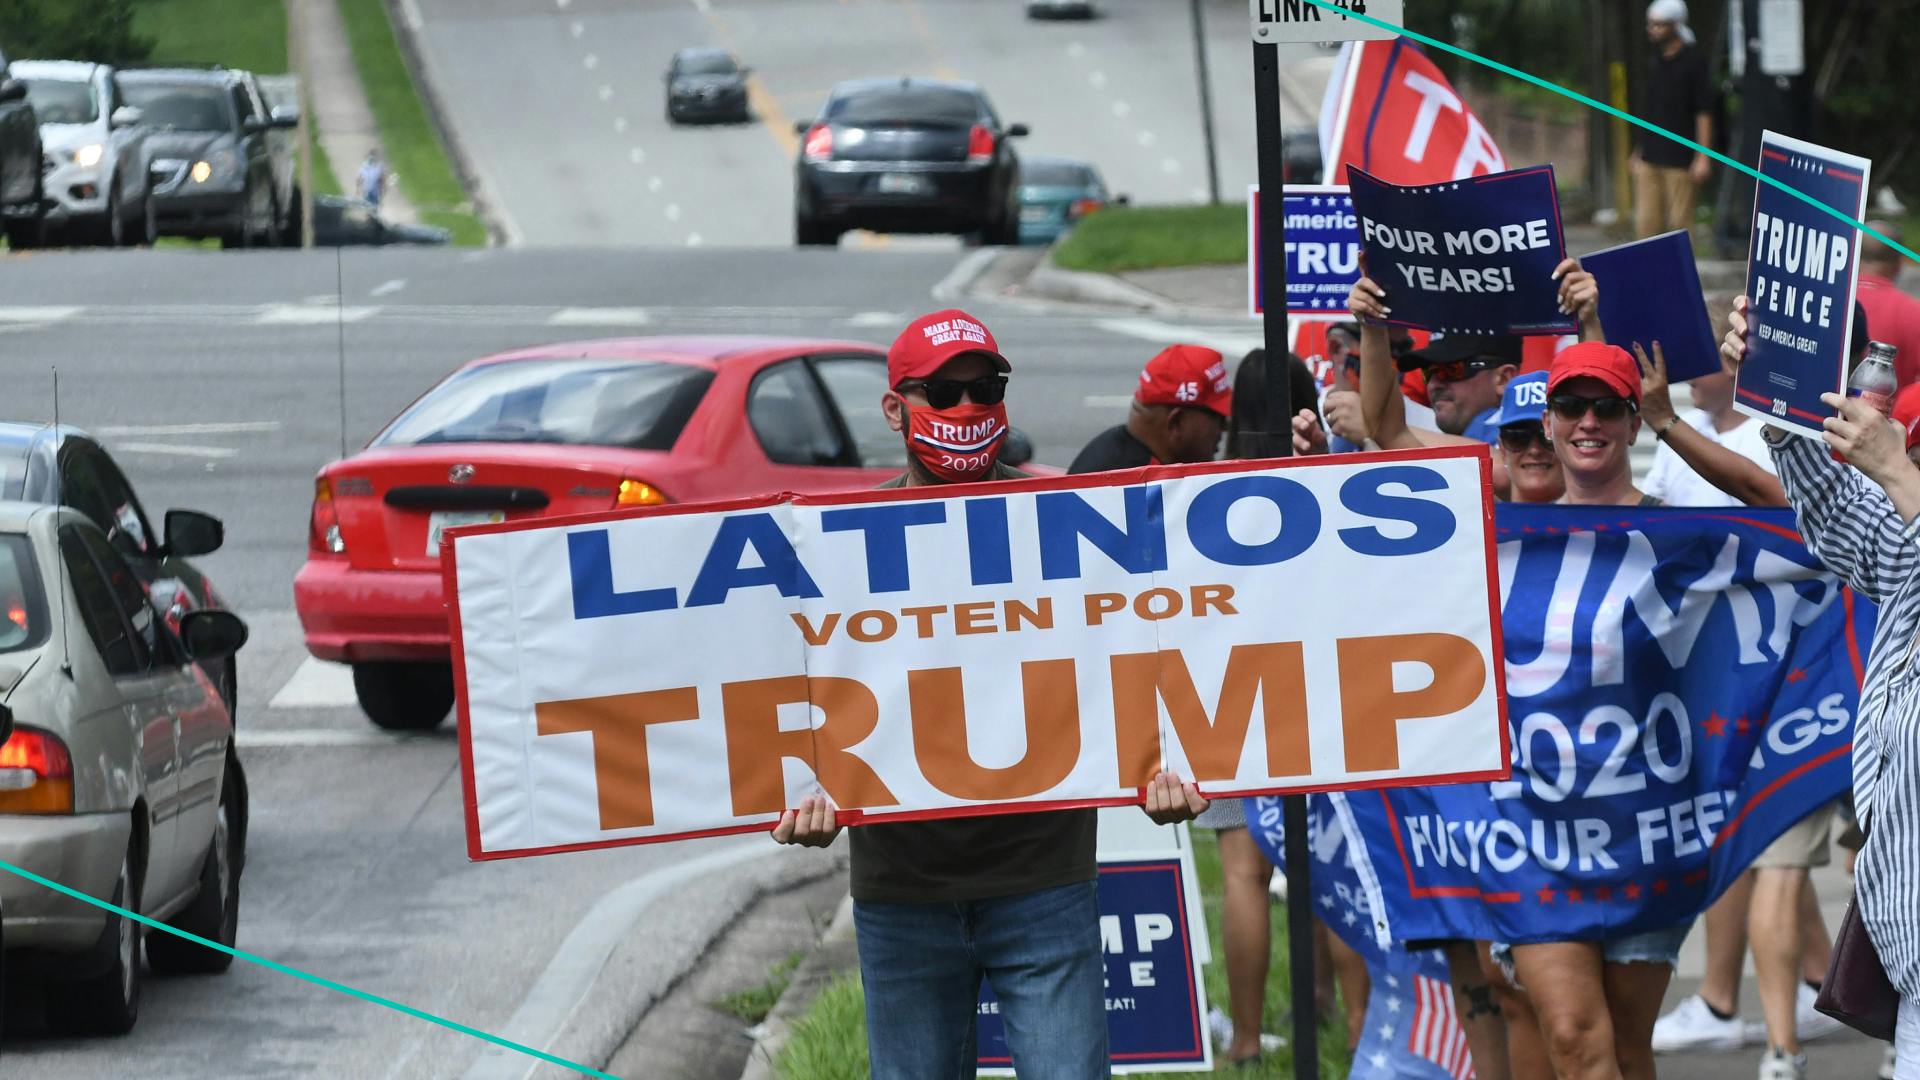 Latinos for Trump campaign rally at Central Christian University on October 10, 2020 in Orlando, Florida. 